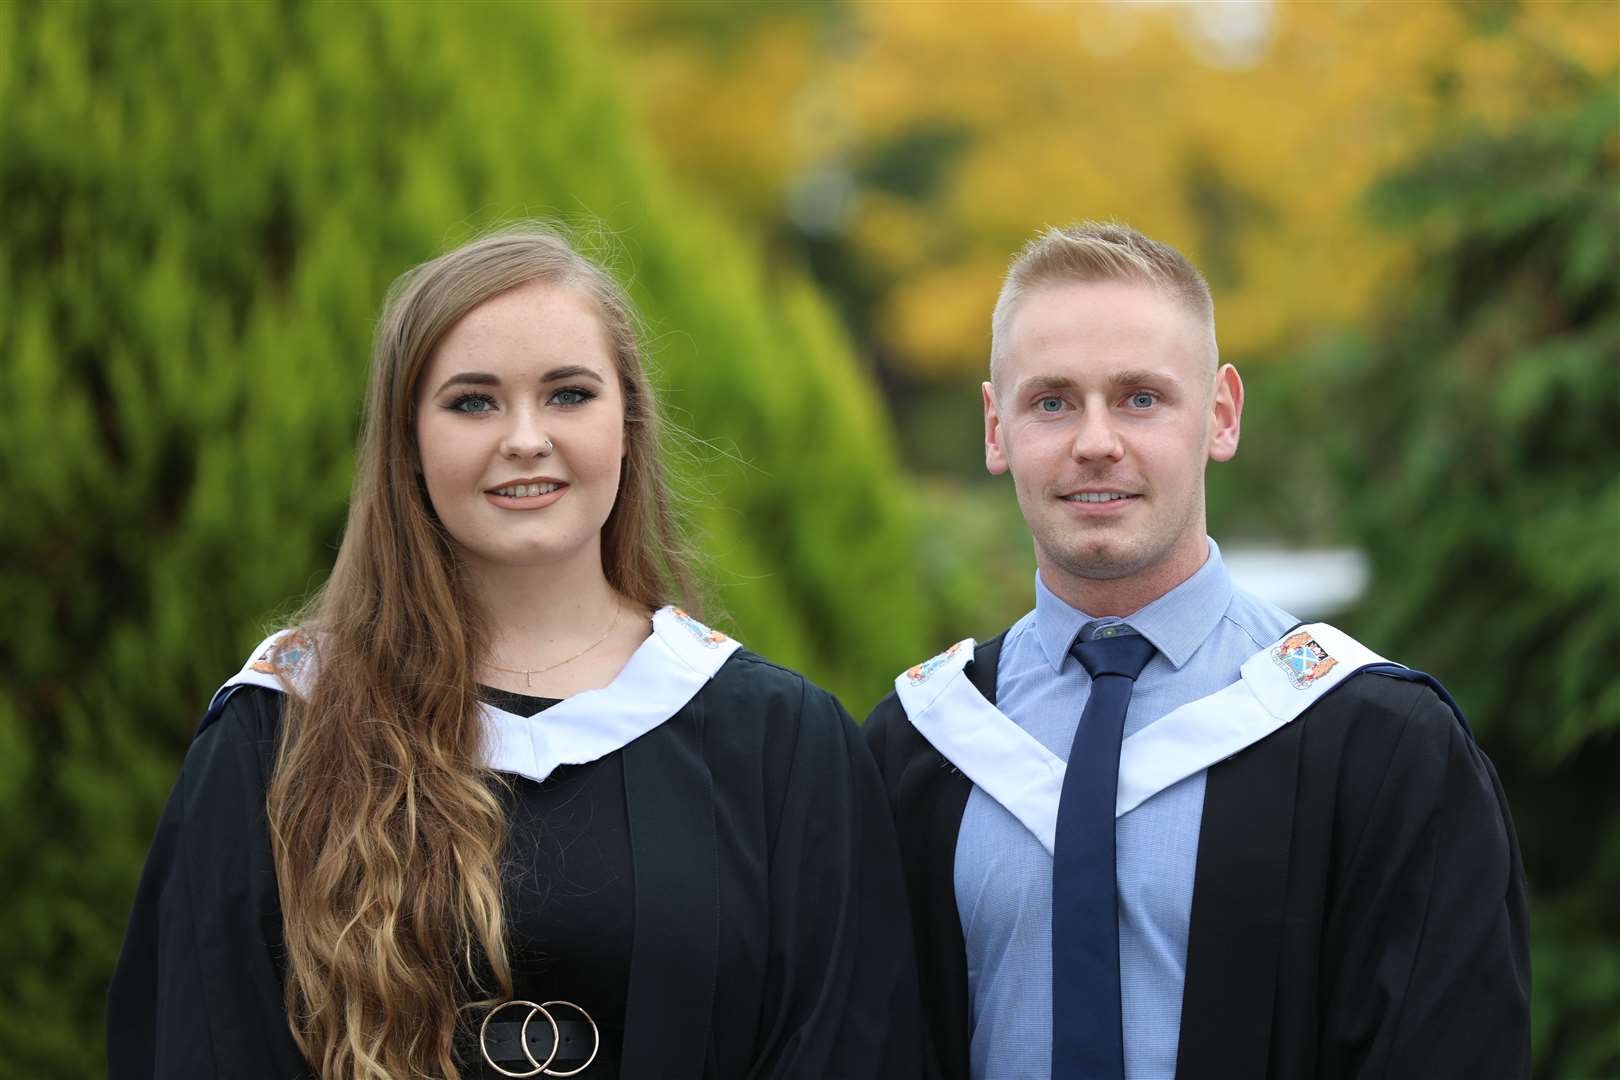 Brother and sister Mykaela and Kieran Alexander have graduated from the same course at college and are now heading to university together.